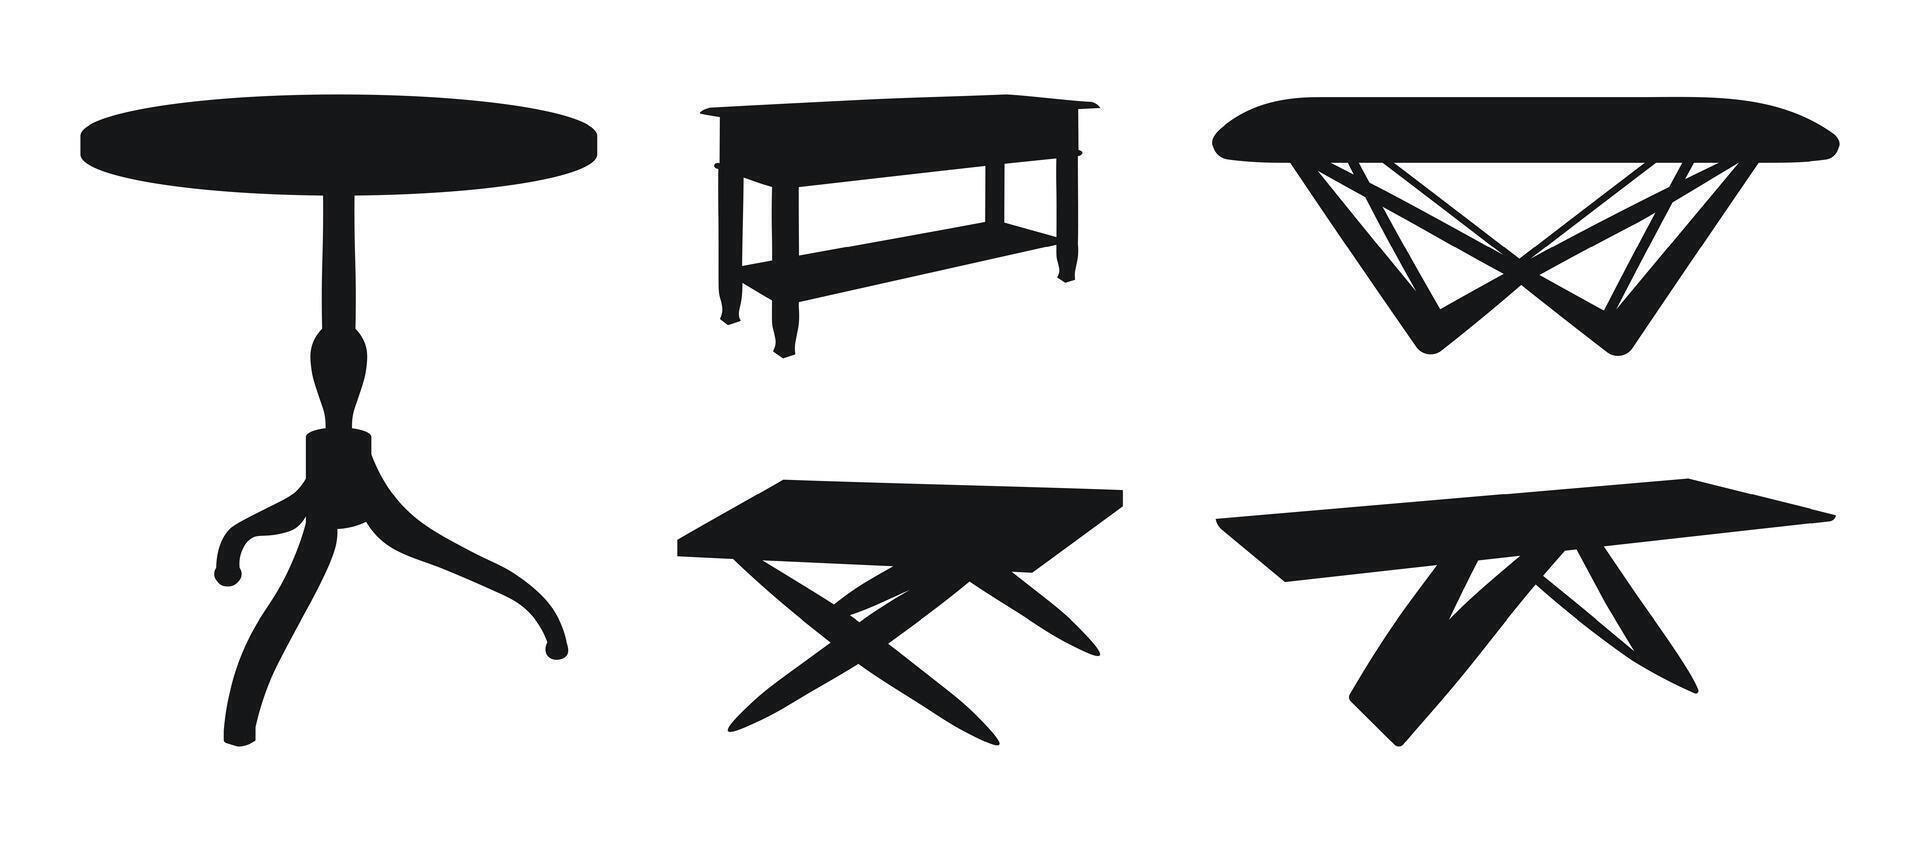 Black silhouette of a desk, dinner table, dressing table, desktop, kitchen table. Piece of furniture vector